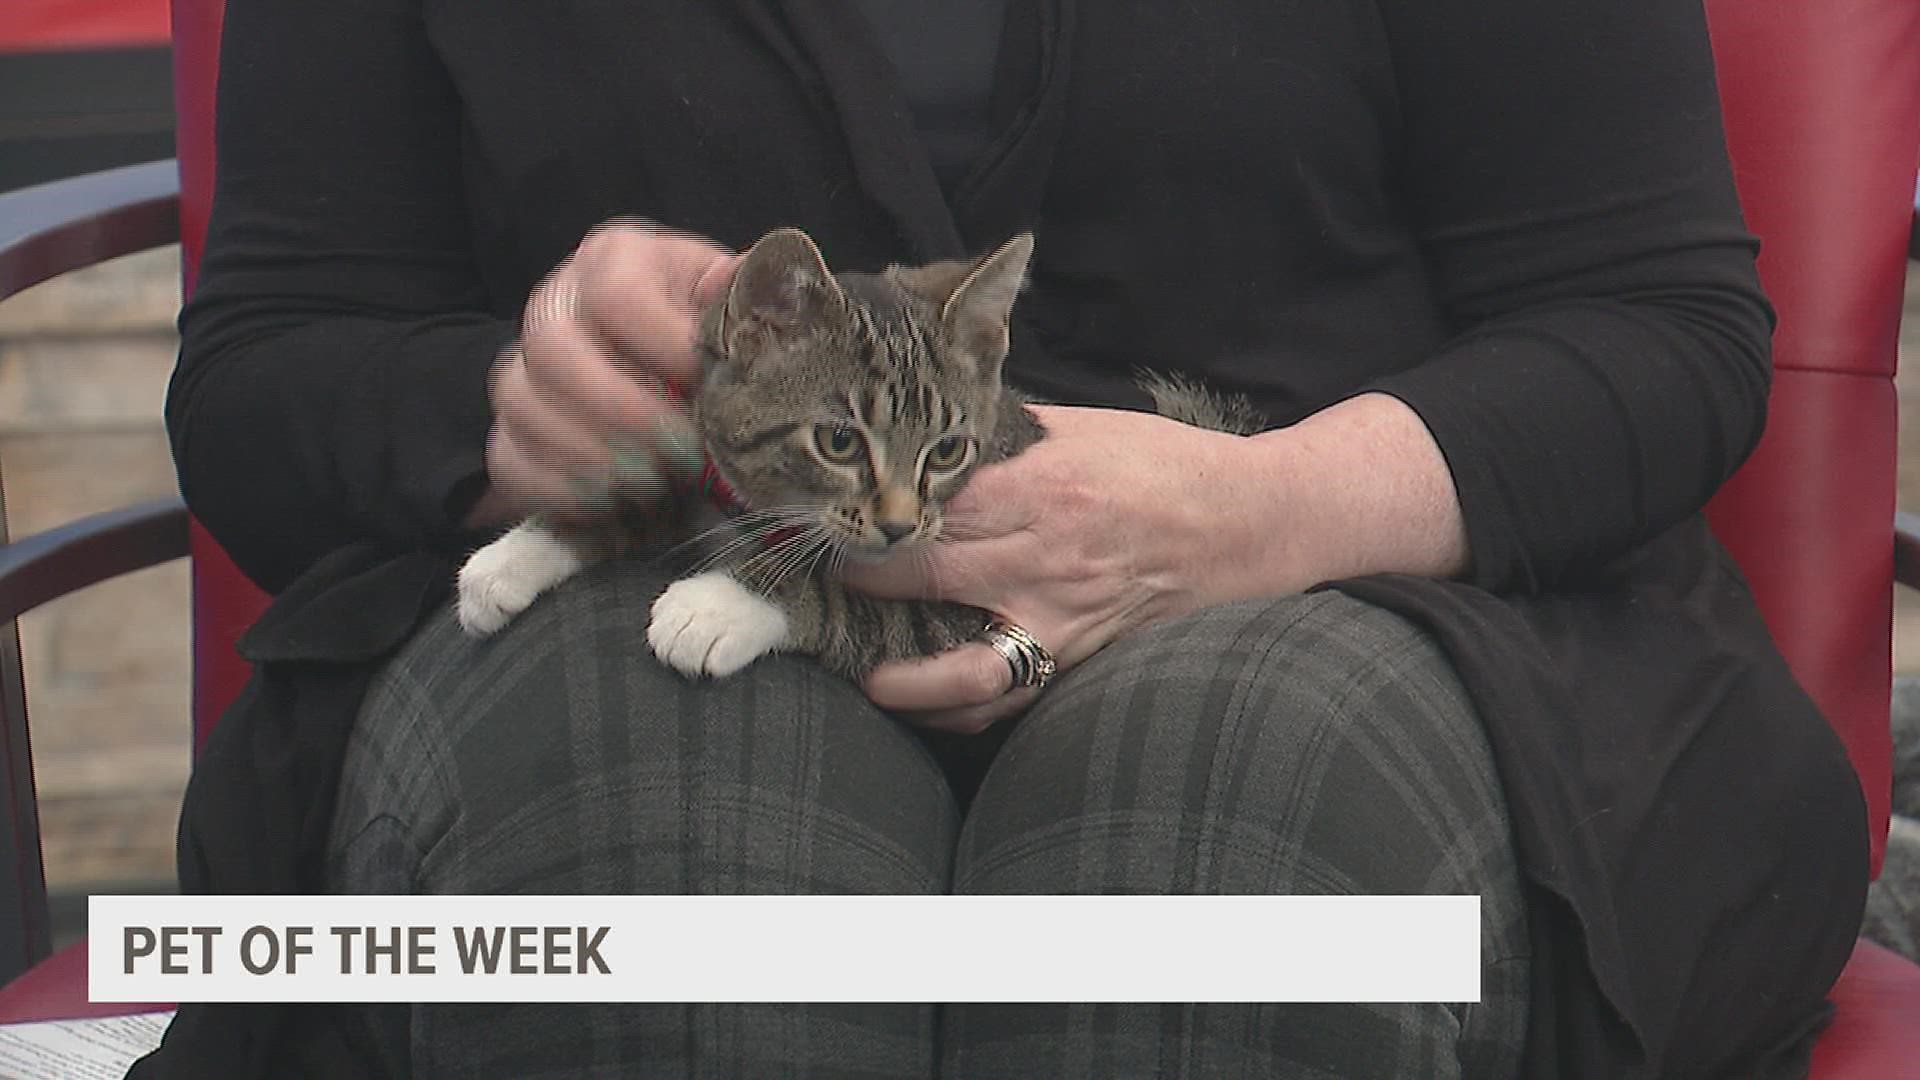 Patti McRae with the Quad City Animal Welfare Center joins us with Meatball, our pet of the week! Find out how you can help the Quad City Animal Welfare Center.